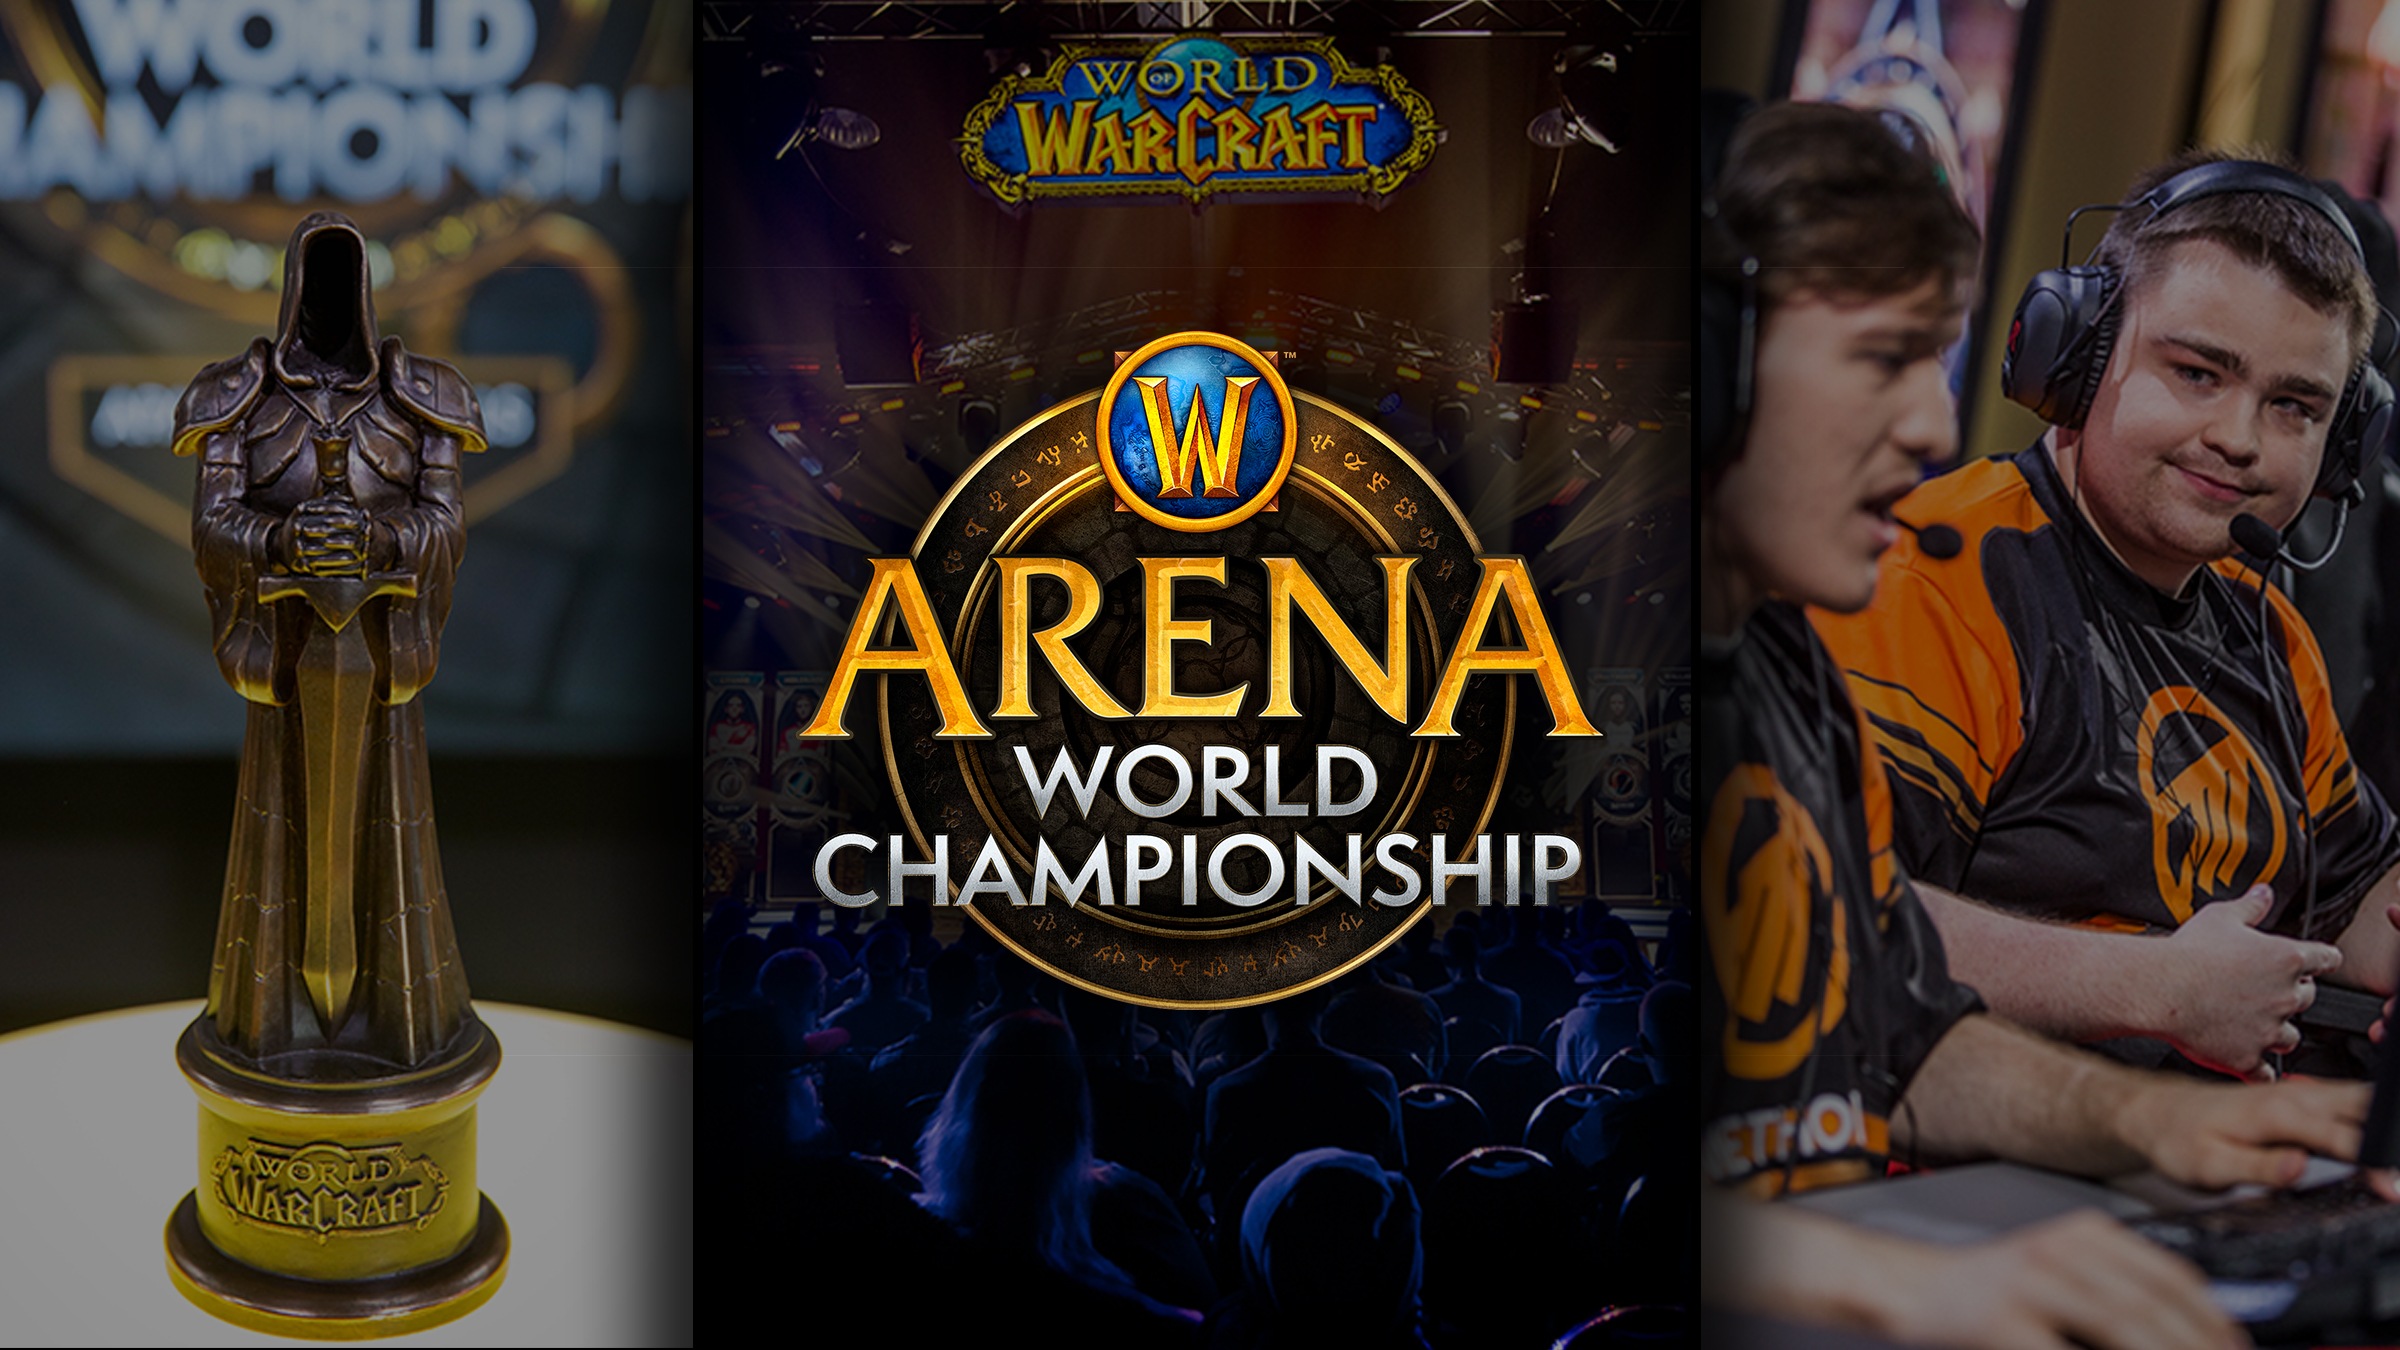 Watch the Arena World Championship Fall Cup 2 Friday 9/28 and Saturday 9/29!